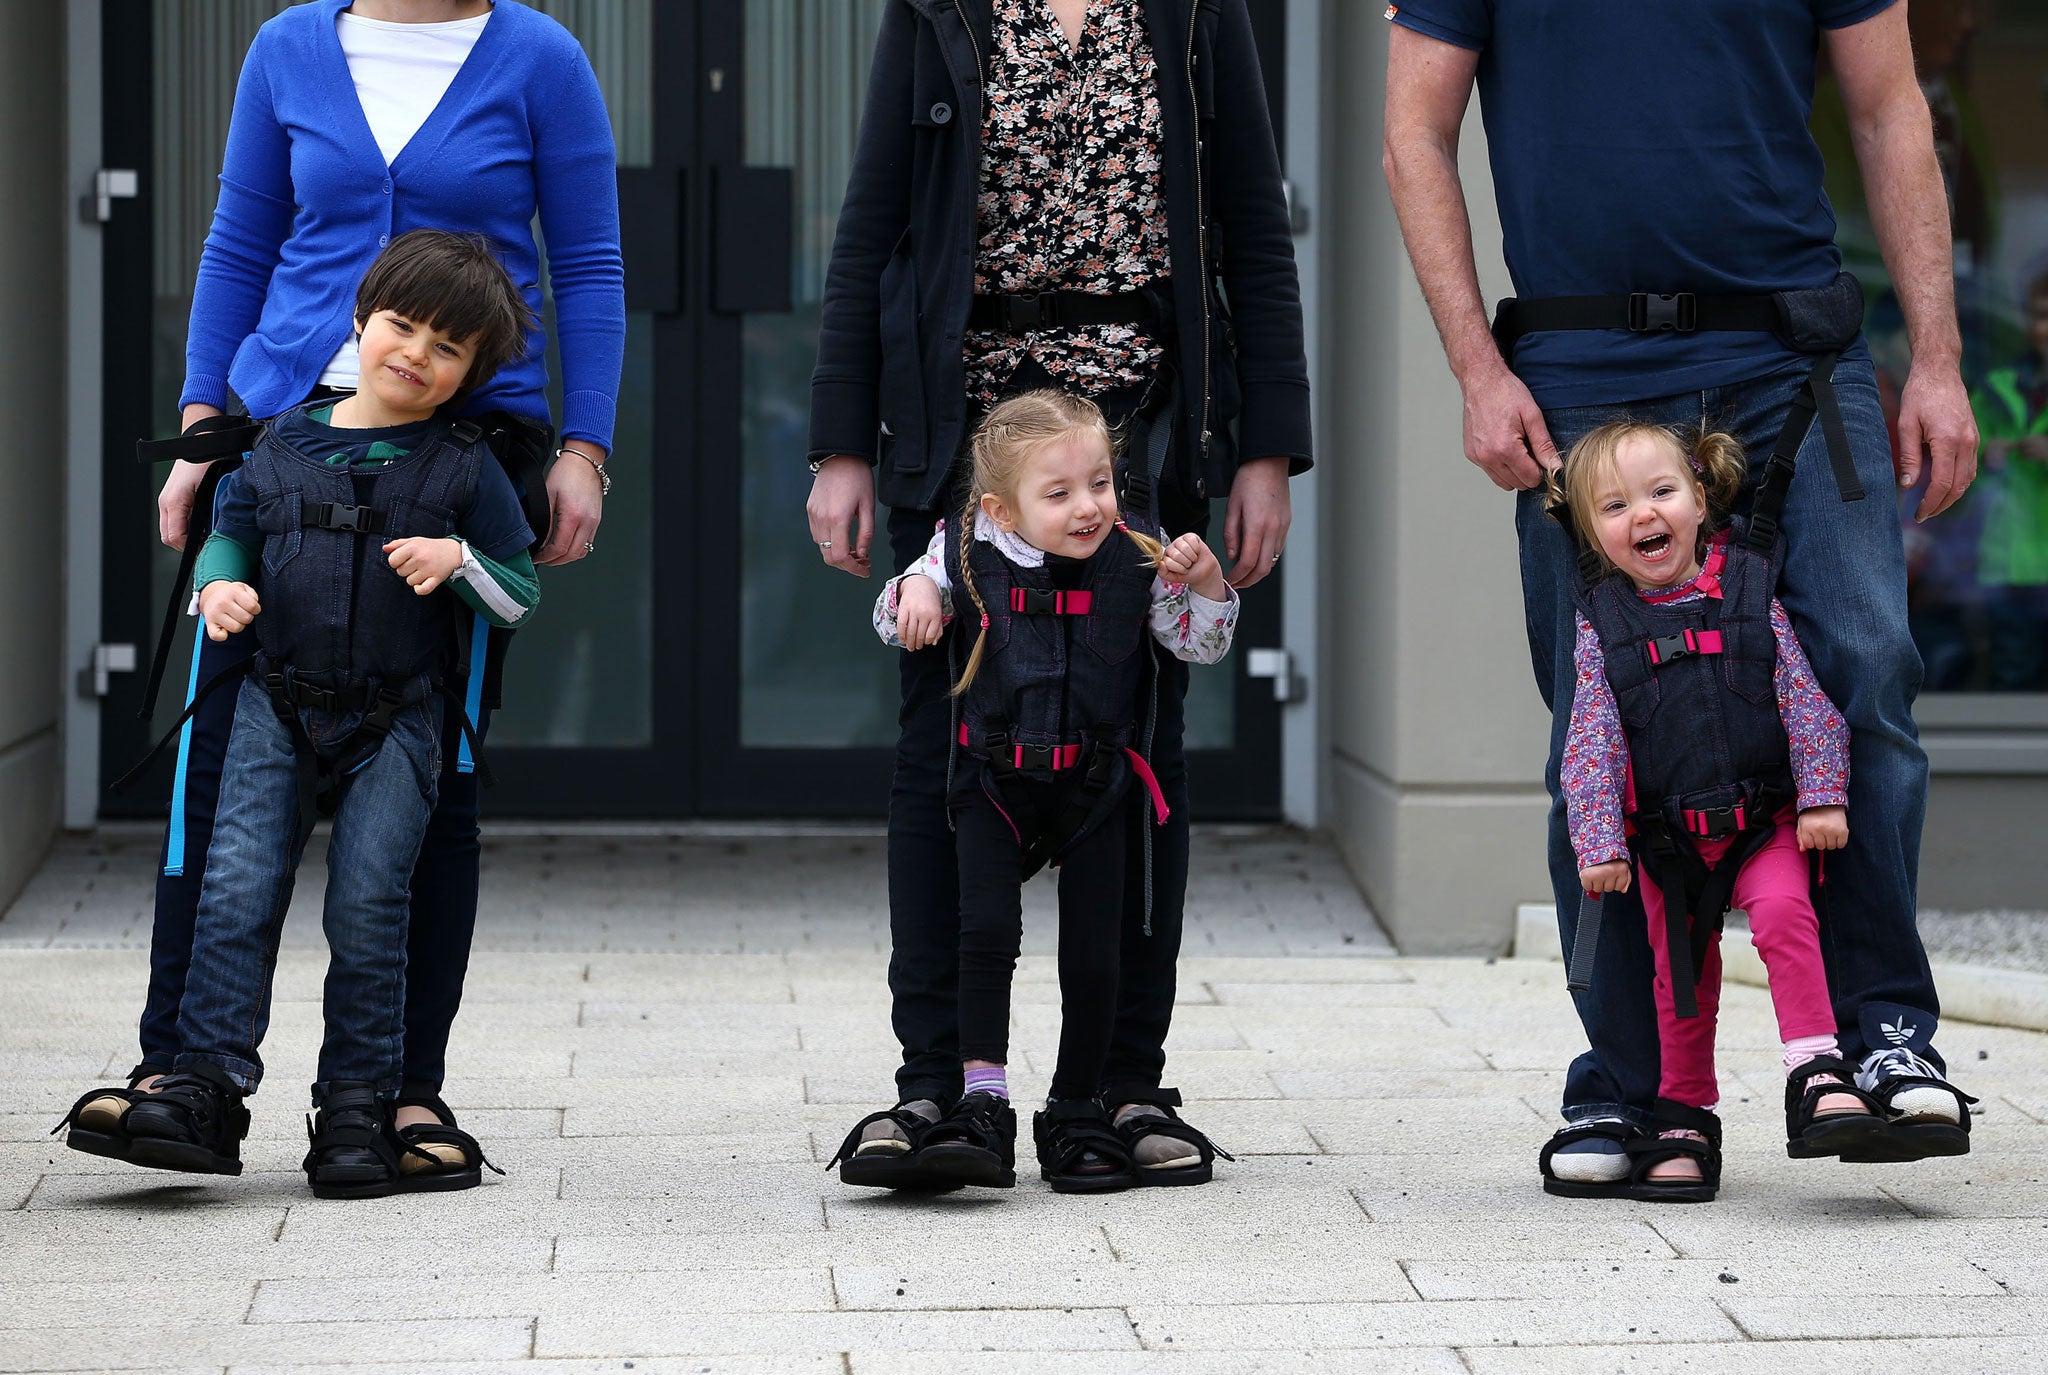 Daniel Smyth, 5, Bethany Watson, 3, and Charlotte Taylor, 3, using a Firefly Upsee, a new standing and walking harness for children with motor impairment, which attaches to a parent, allowing them and their child to take steps together